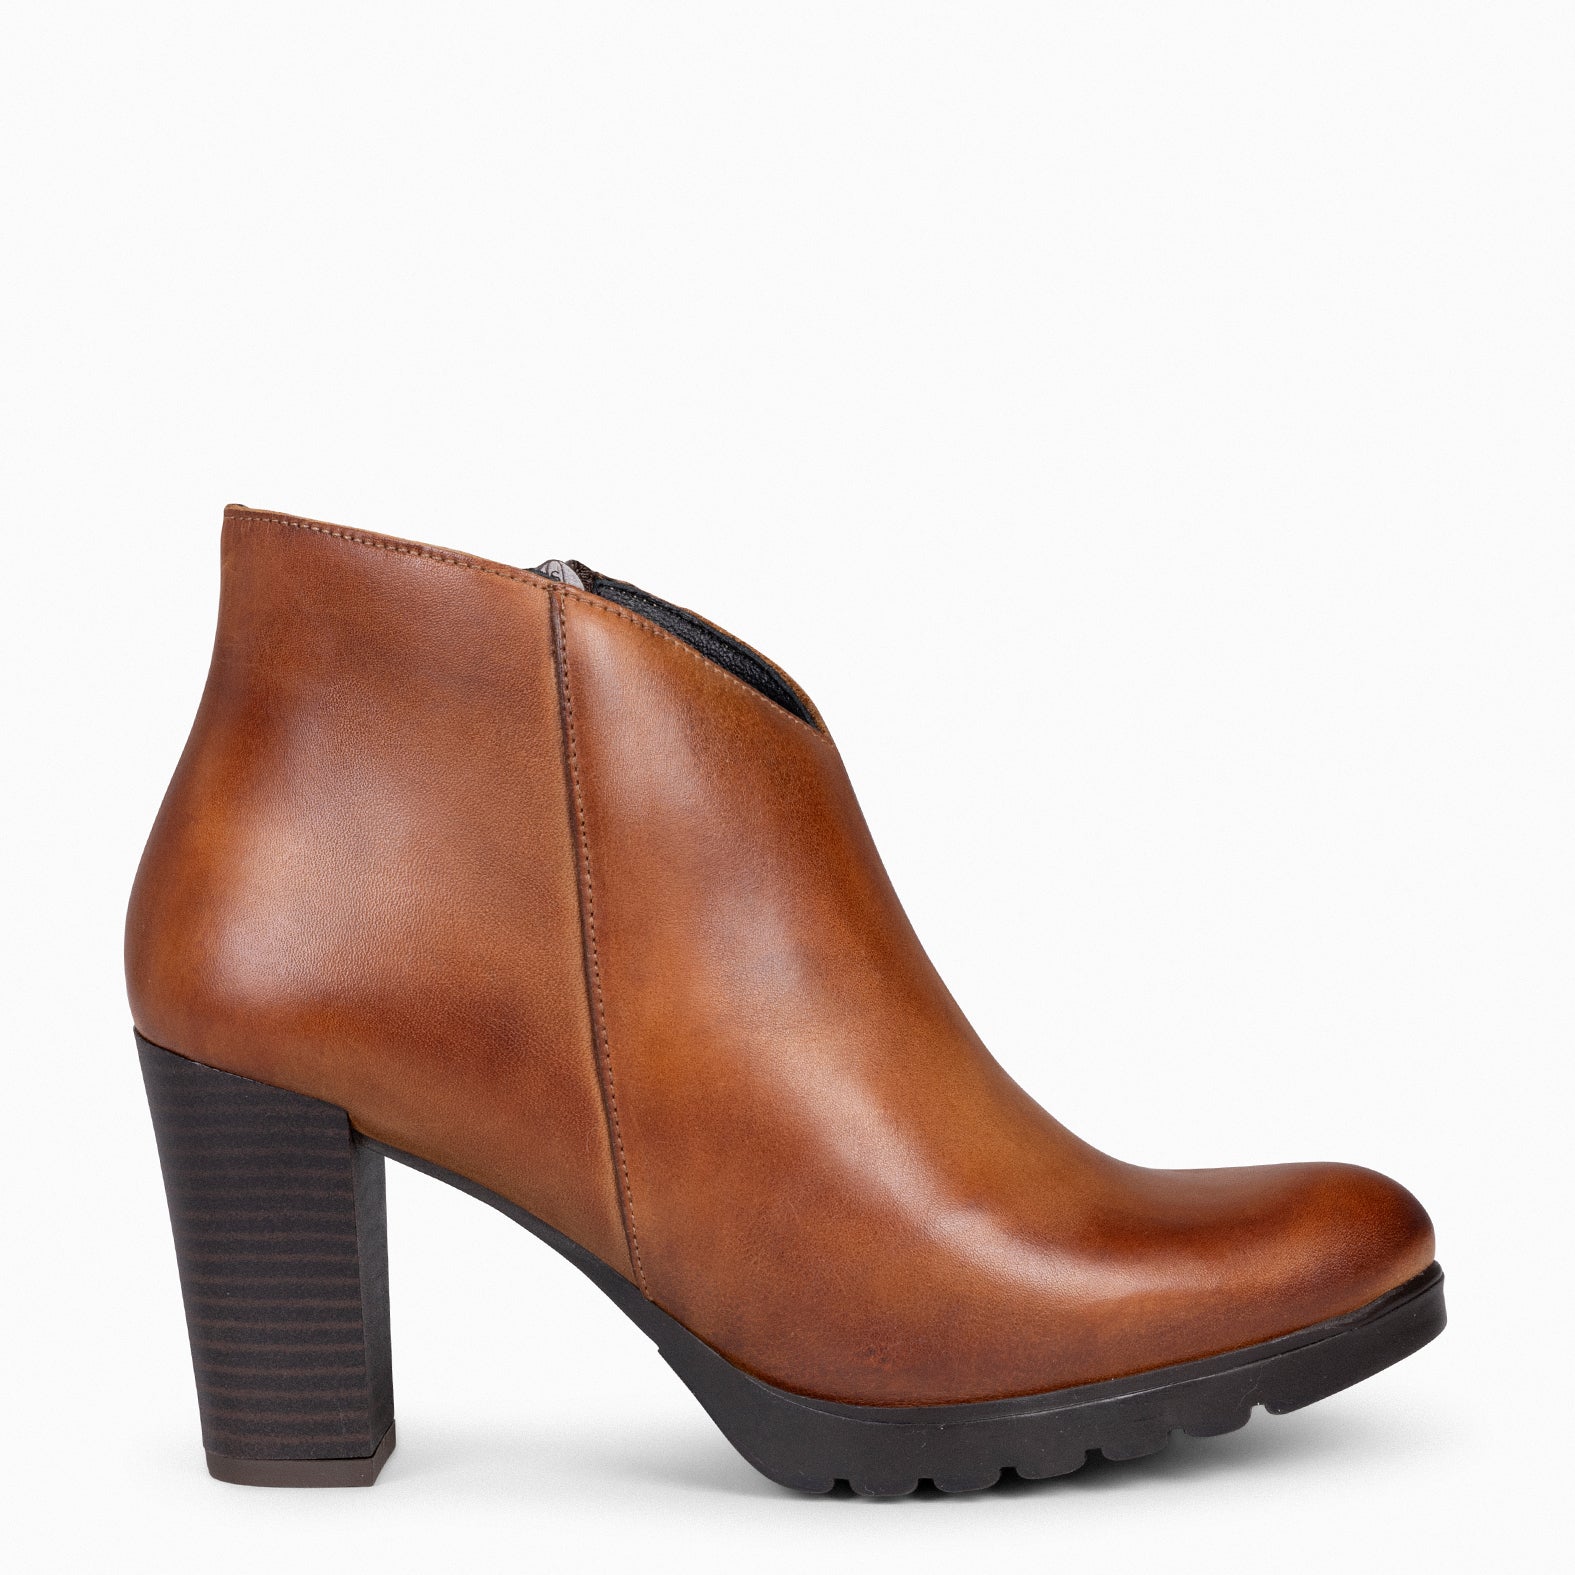 CLASSIC - CAMEL Women's Ankle Boots with heel